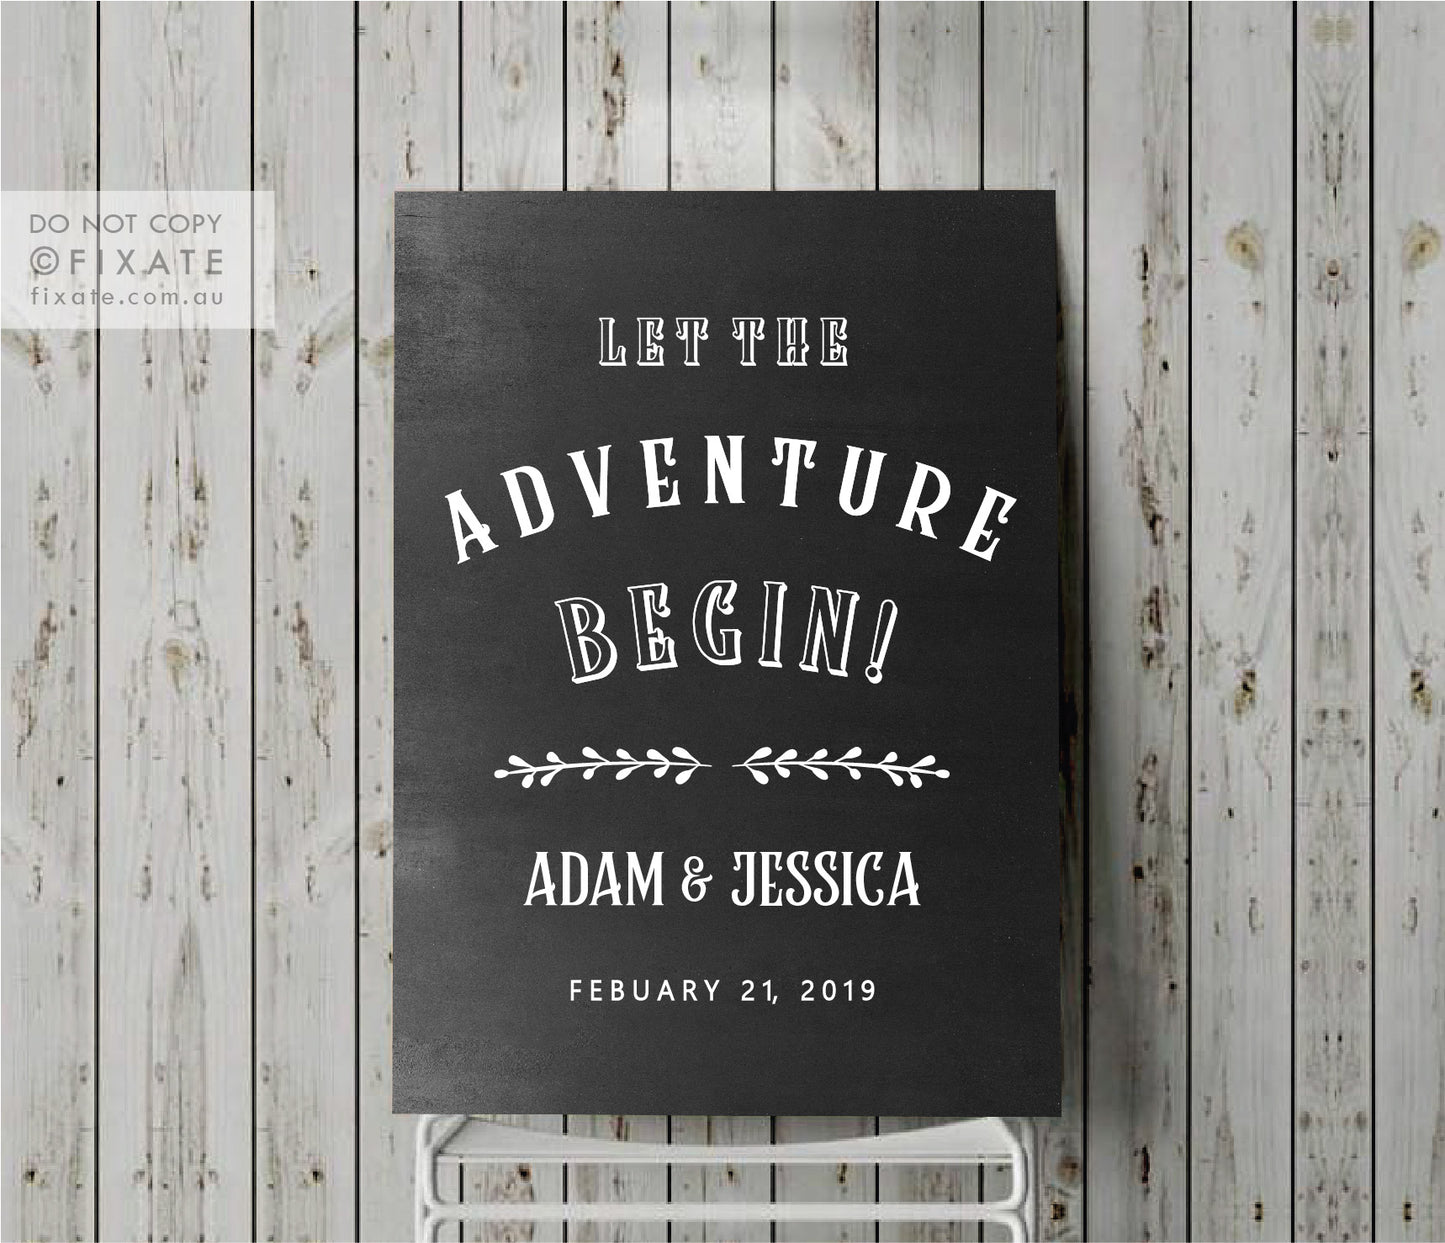 Let the adventure begin - Welcome Wedding Signage Decal